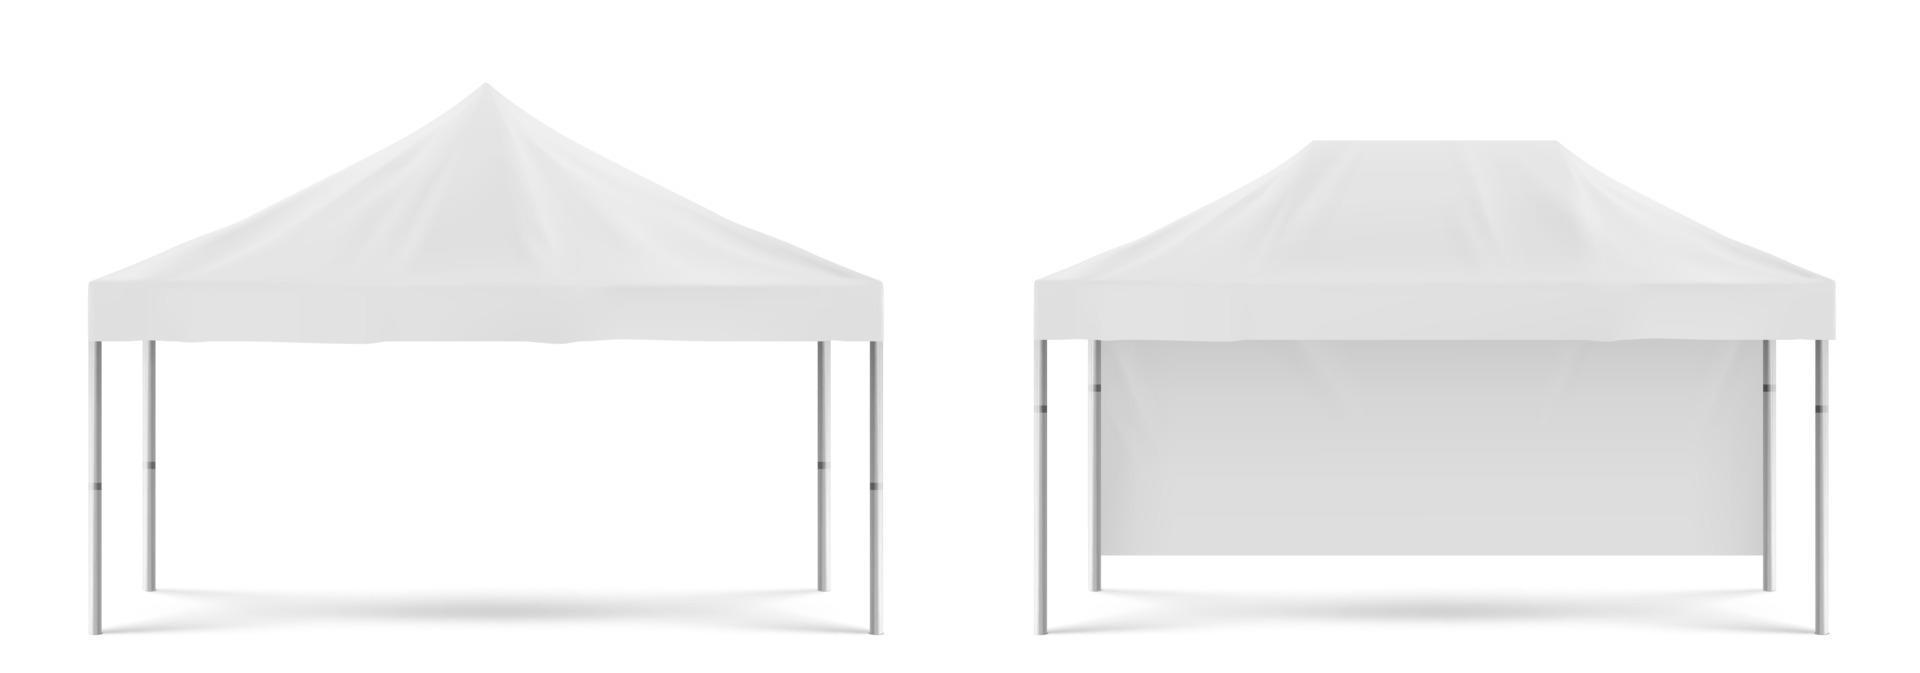 White folding promotion tent, outdoor marquee vector